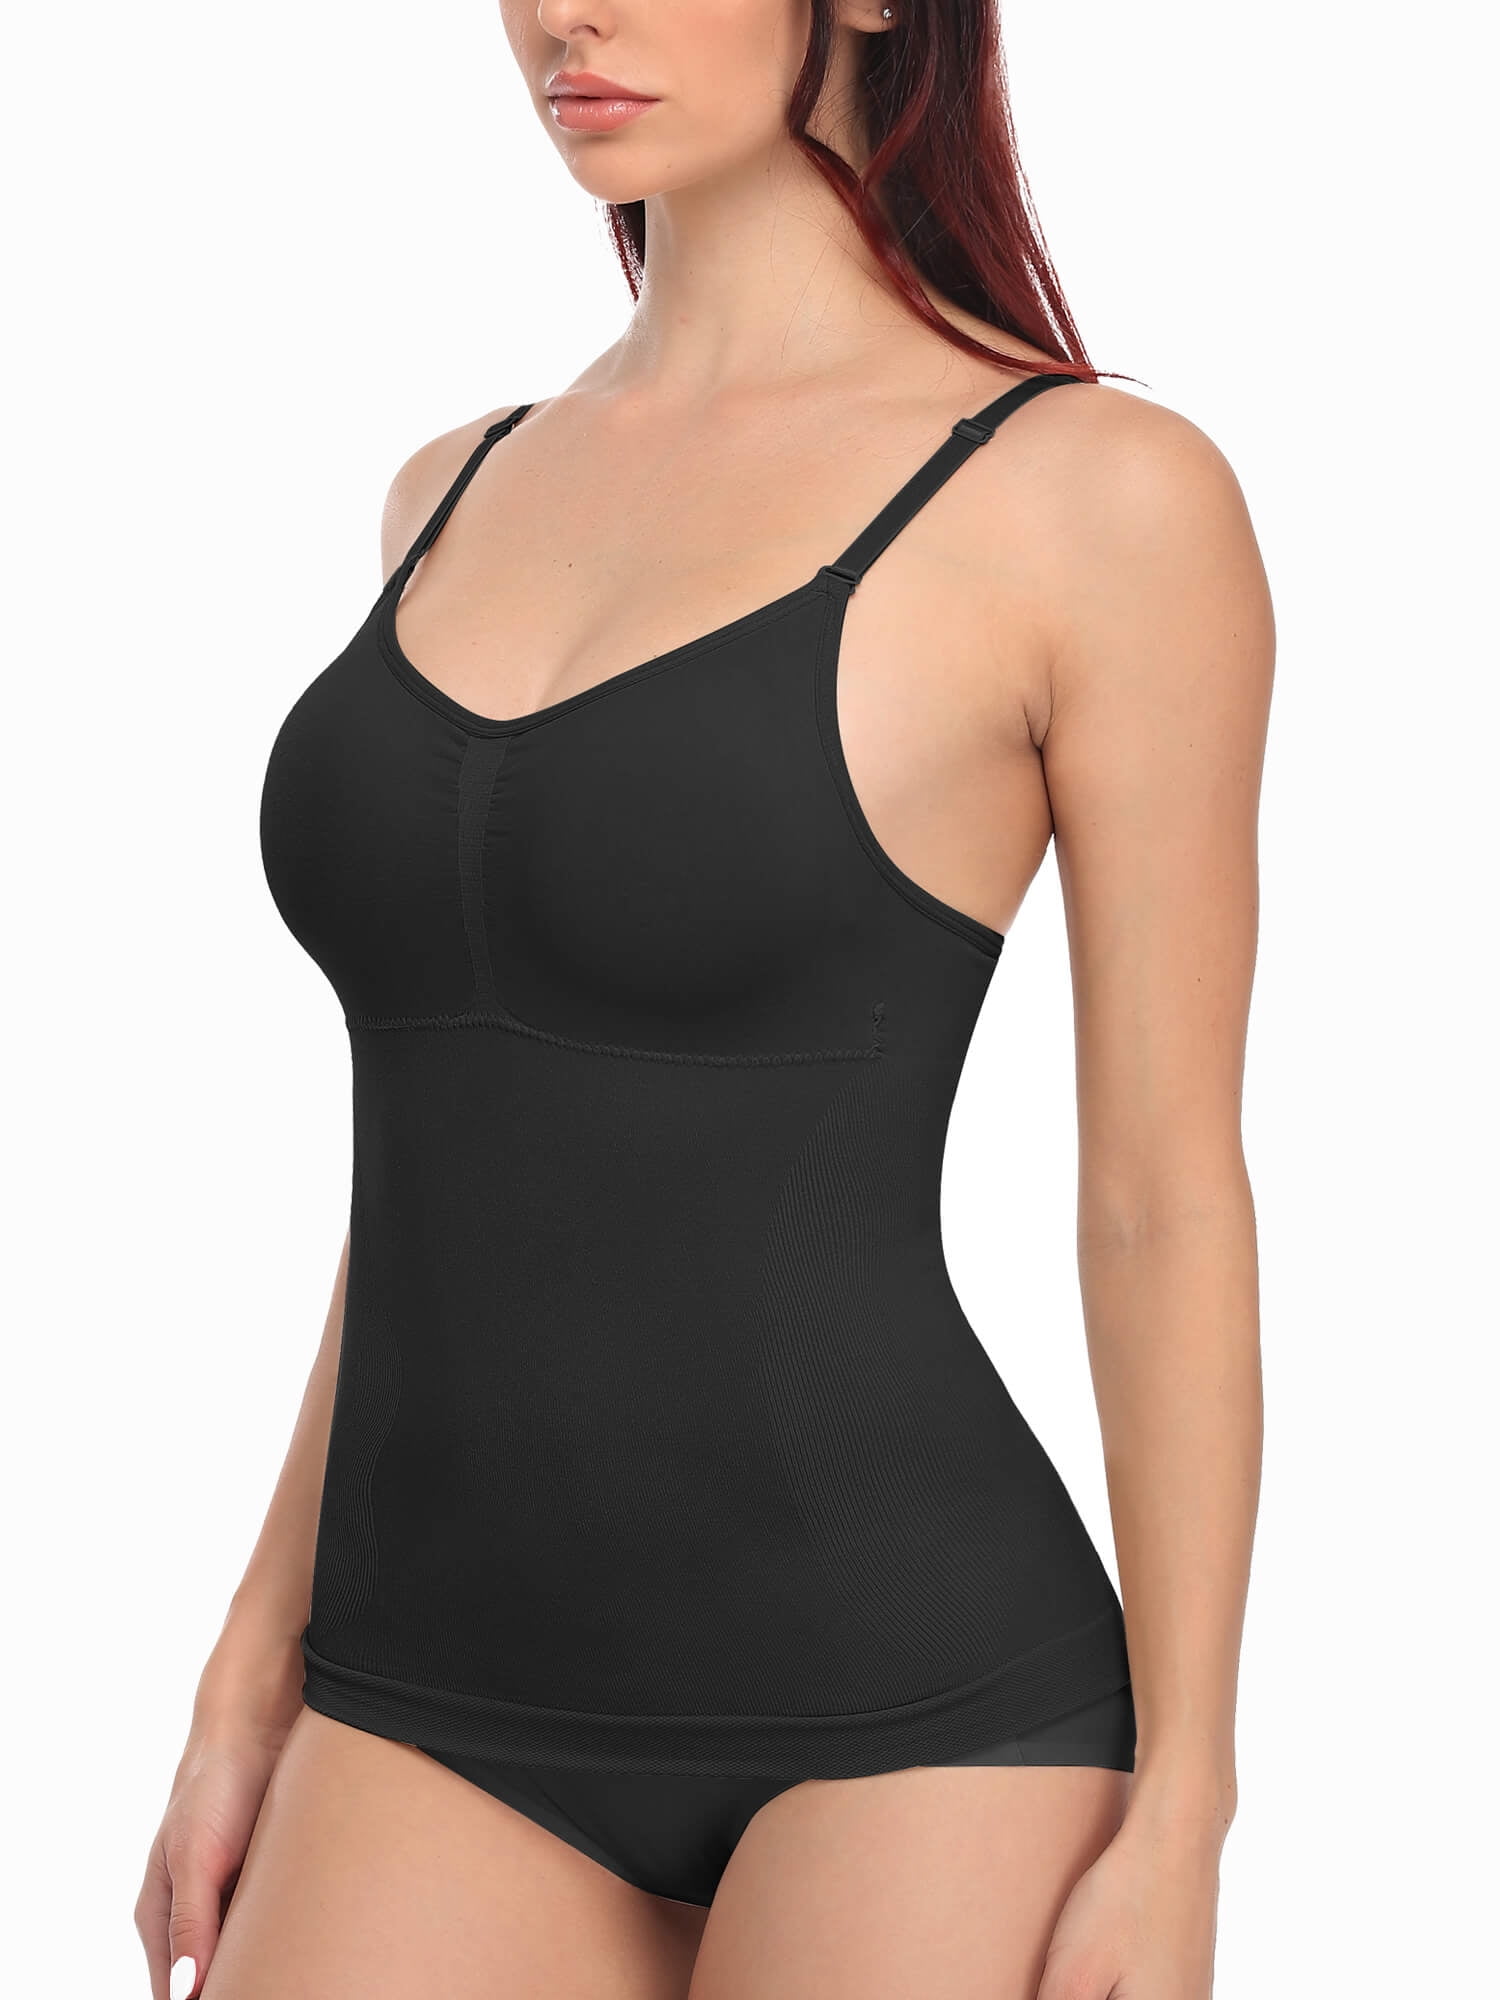 SHAPEVIVA Shapewear Tank Tops for Women - Built-in Padded Bra, Shaping Bust  Tummy Control, Firm Compression Body Shaper